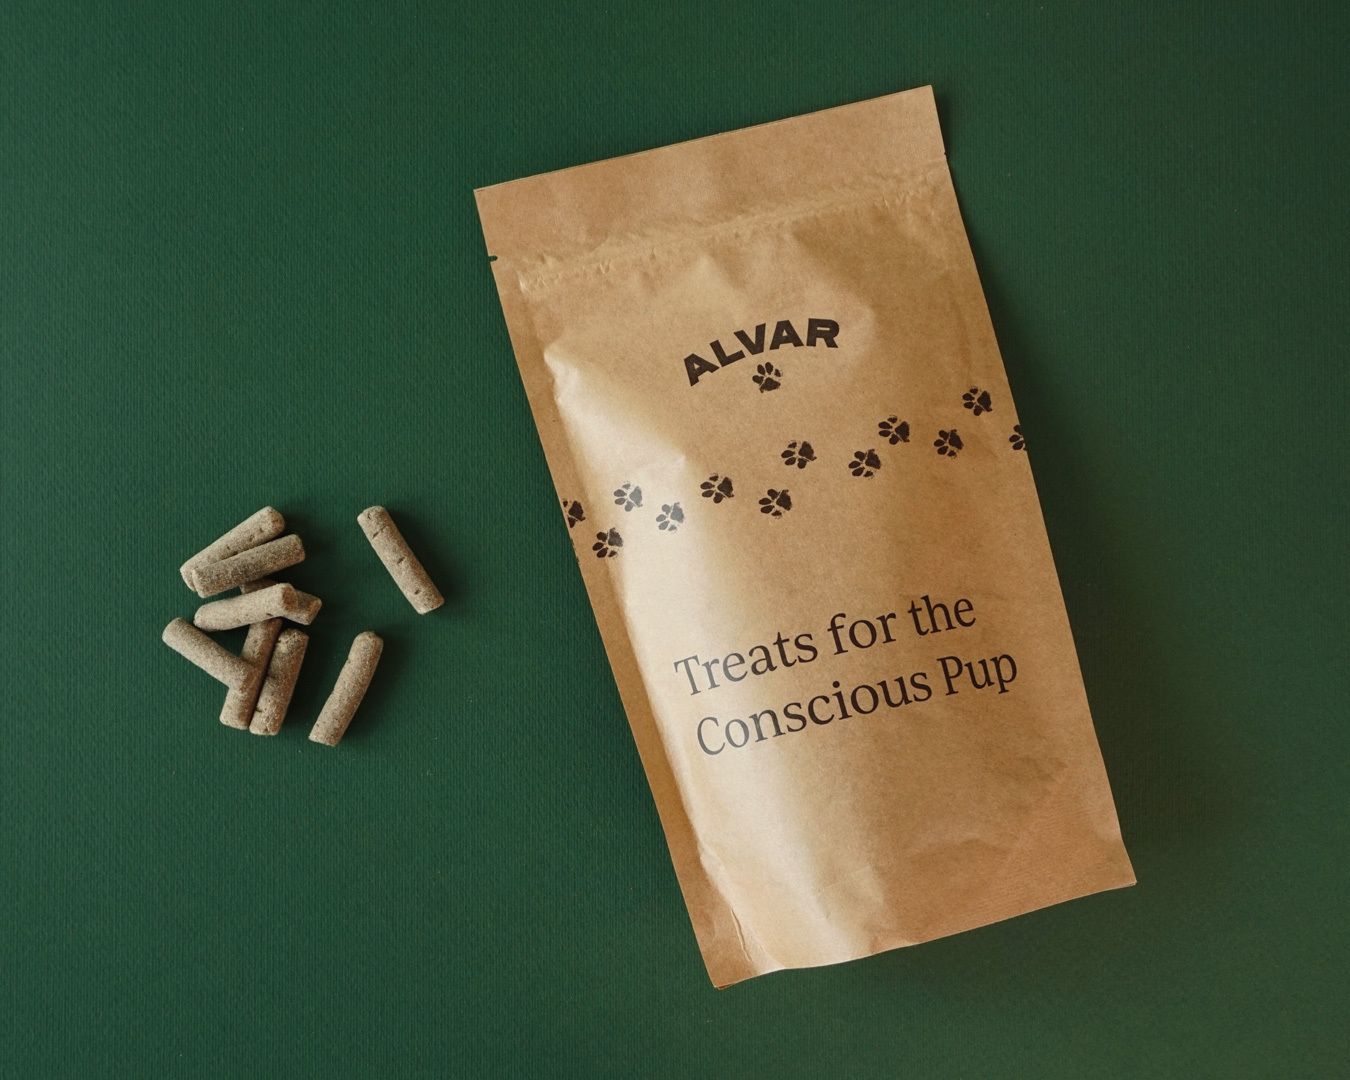 Package of Alvar pet snacks next to a small pile of the snacks